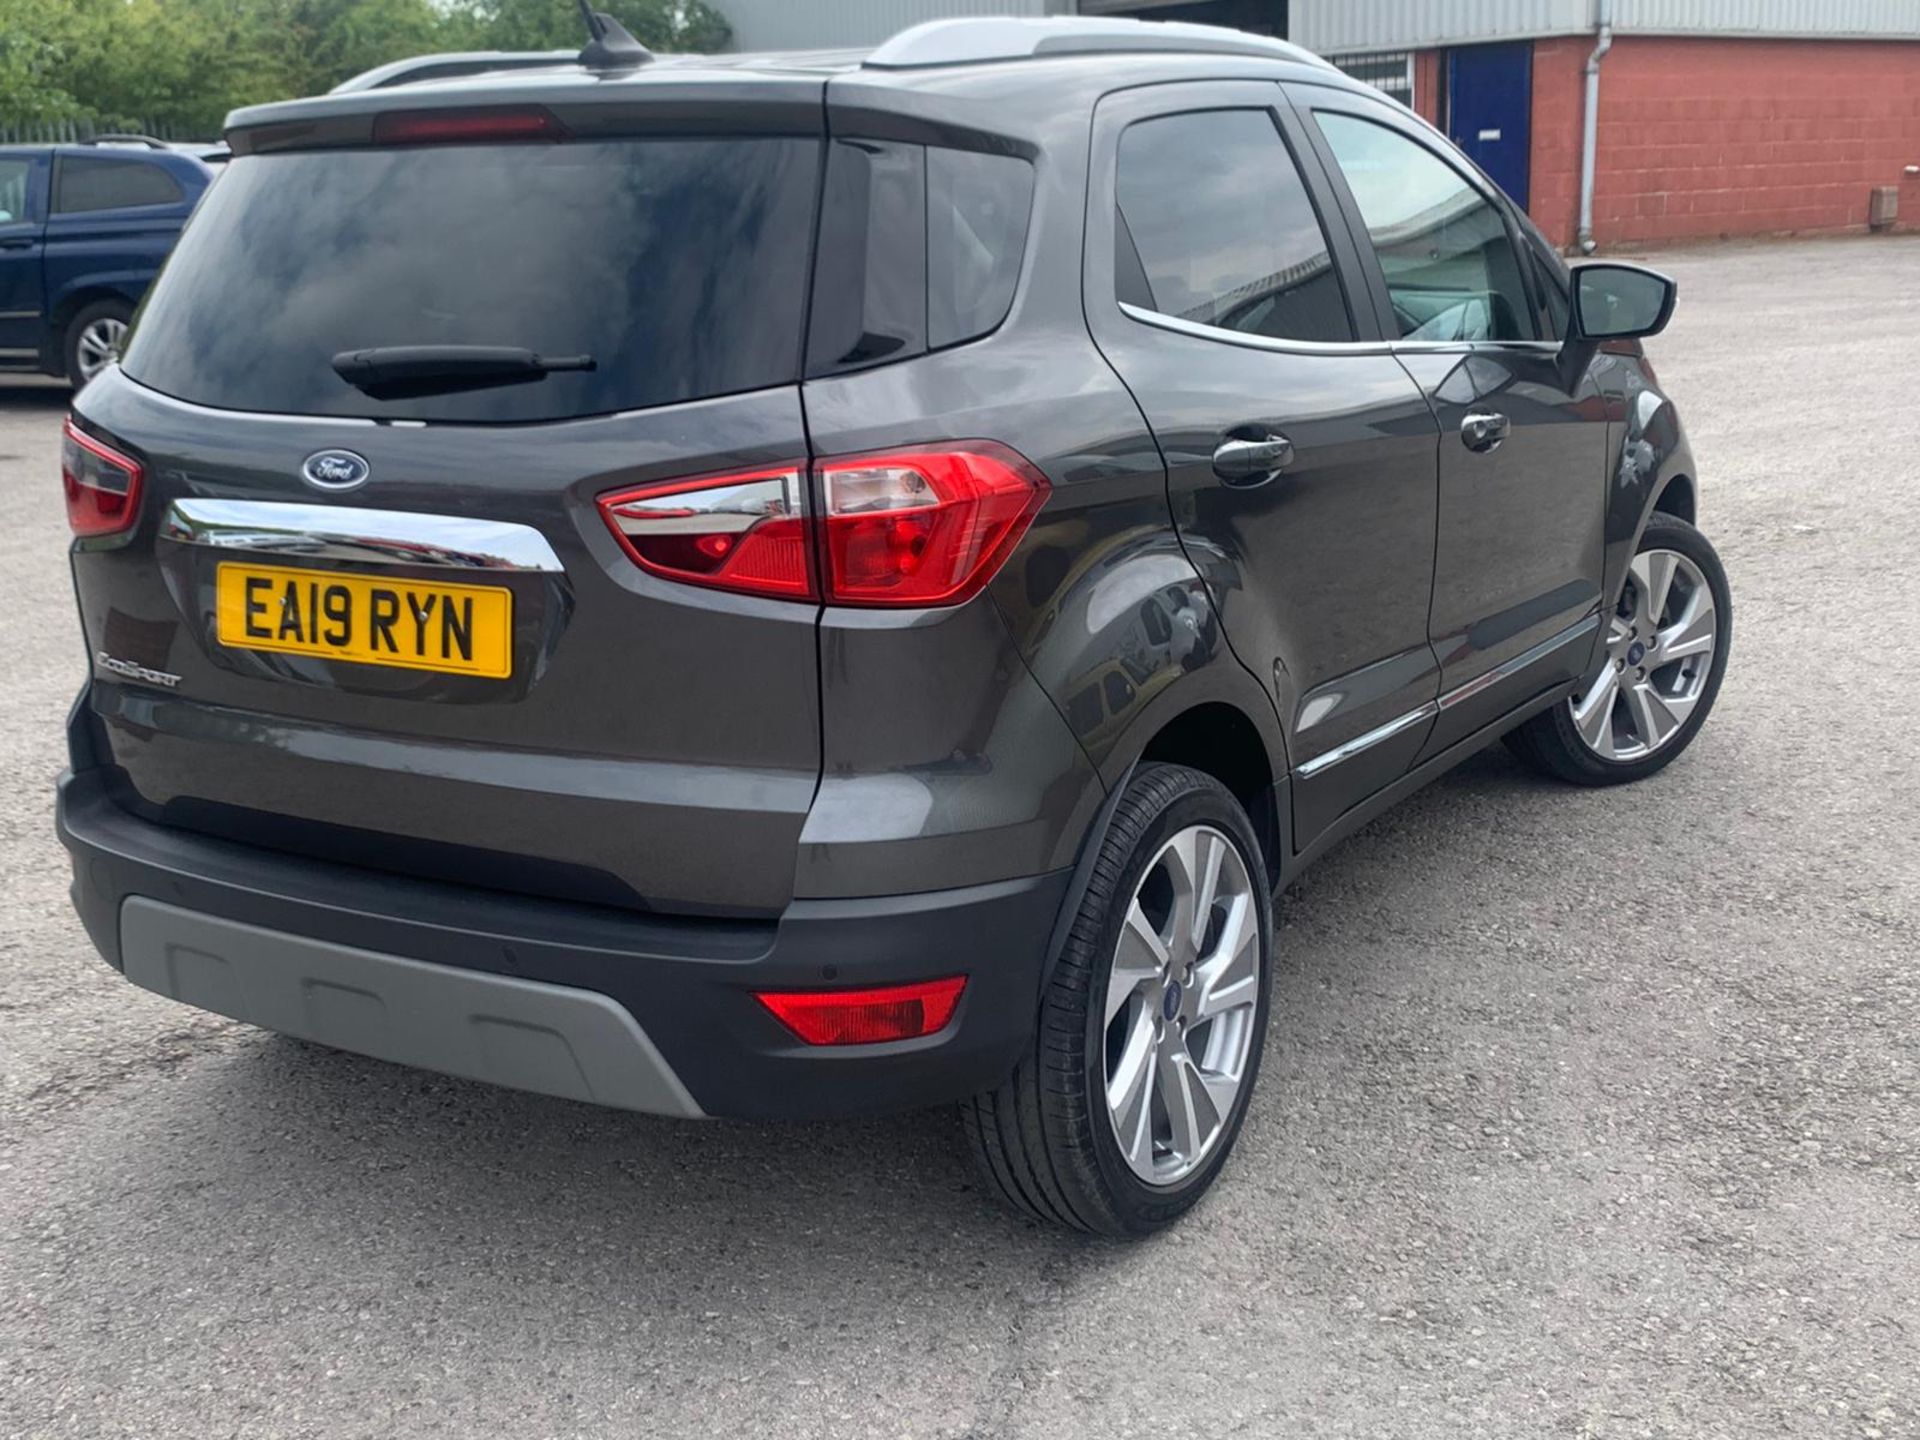 2019/19 REG FORD ECOSPORT TITANIUM 998CC PETROL 125BHP 5DR, SHOWING 0 FORMER KEEPERS *NO VAT* - Image 5 of 14